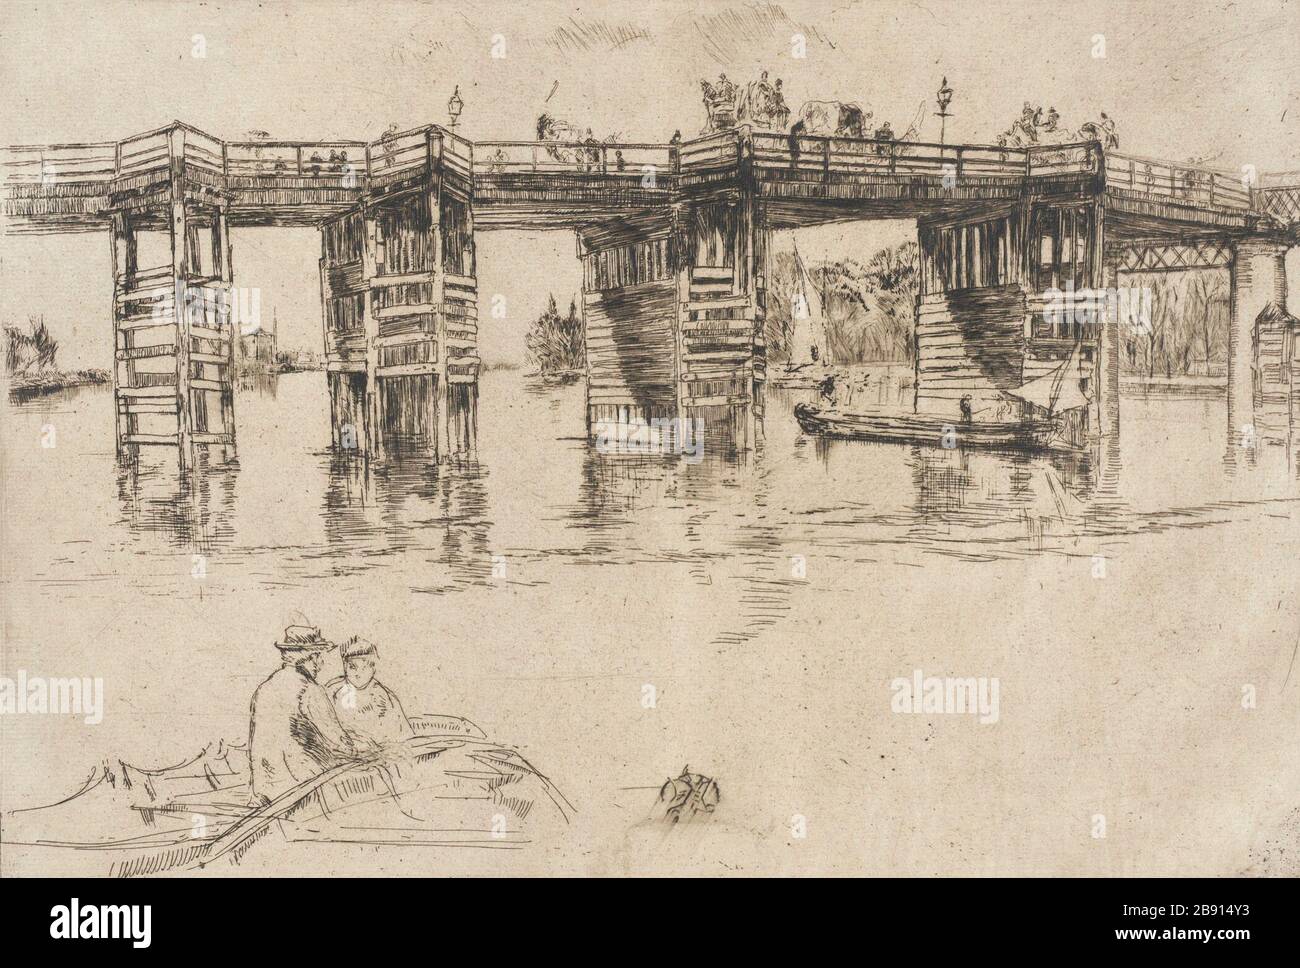 'Old Putney Bridge; English:  United States, 1879 Prints; etchings Etching and drypoint 7 15/16 x 11 5/8 in. (20.16 x 29.53 cm) Gift of The Julius and Anita Zelman Collection (AC1992.234.9) Prints and Drawings; 1879date QS:P571,+1879-00-00T00:00:00Z/9; ' Stock Photo